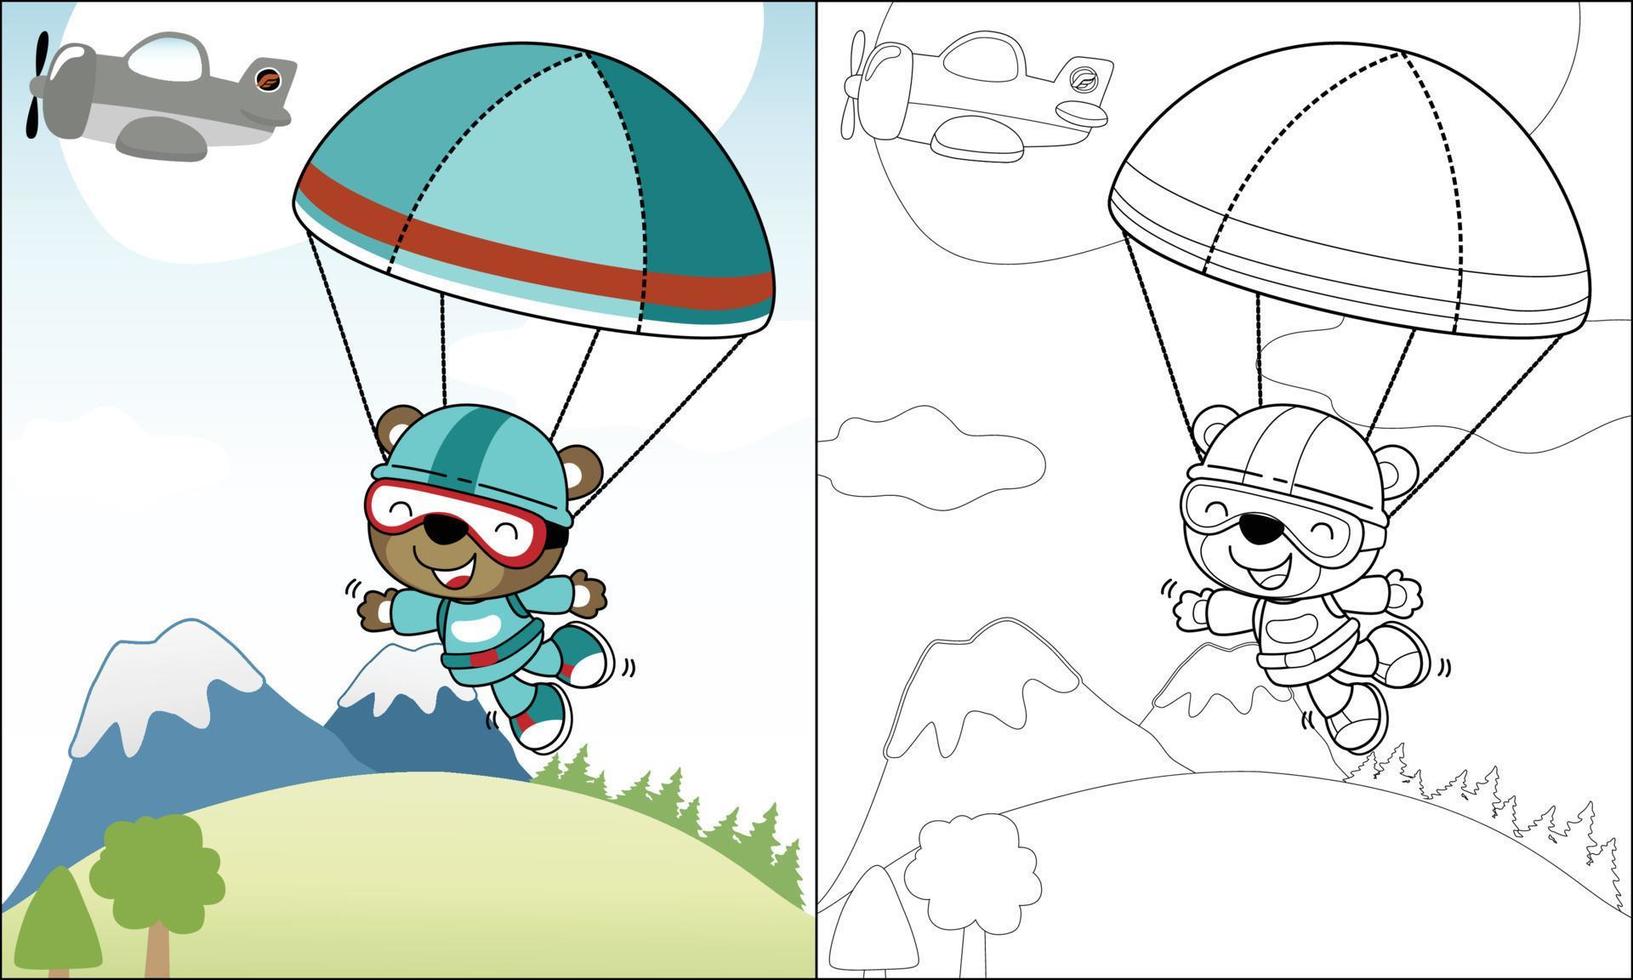 Coloring book of cute bear skydiving on mountains background vector